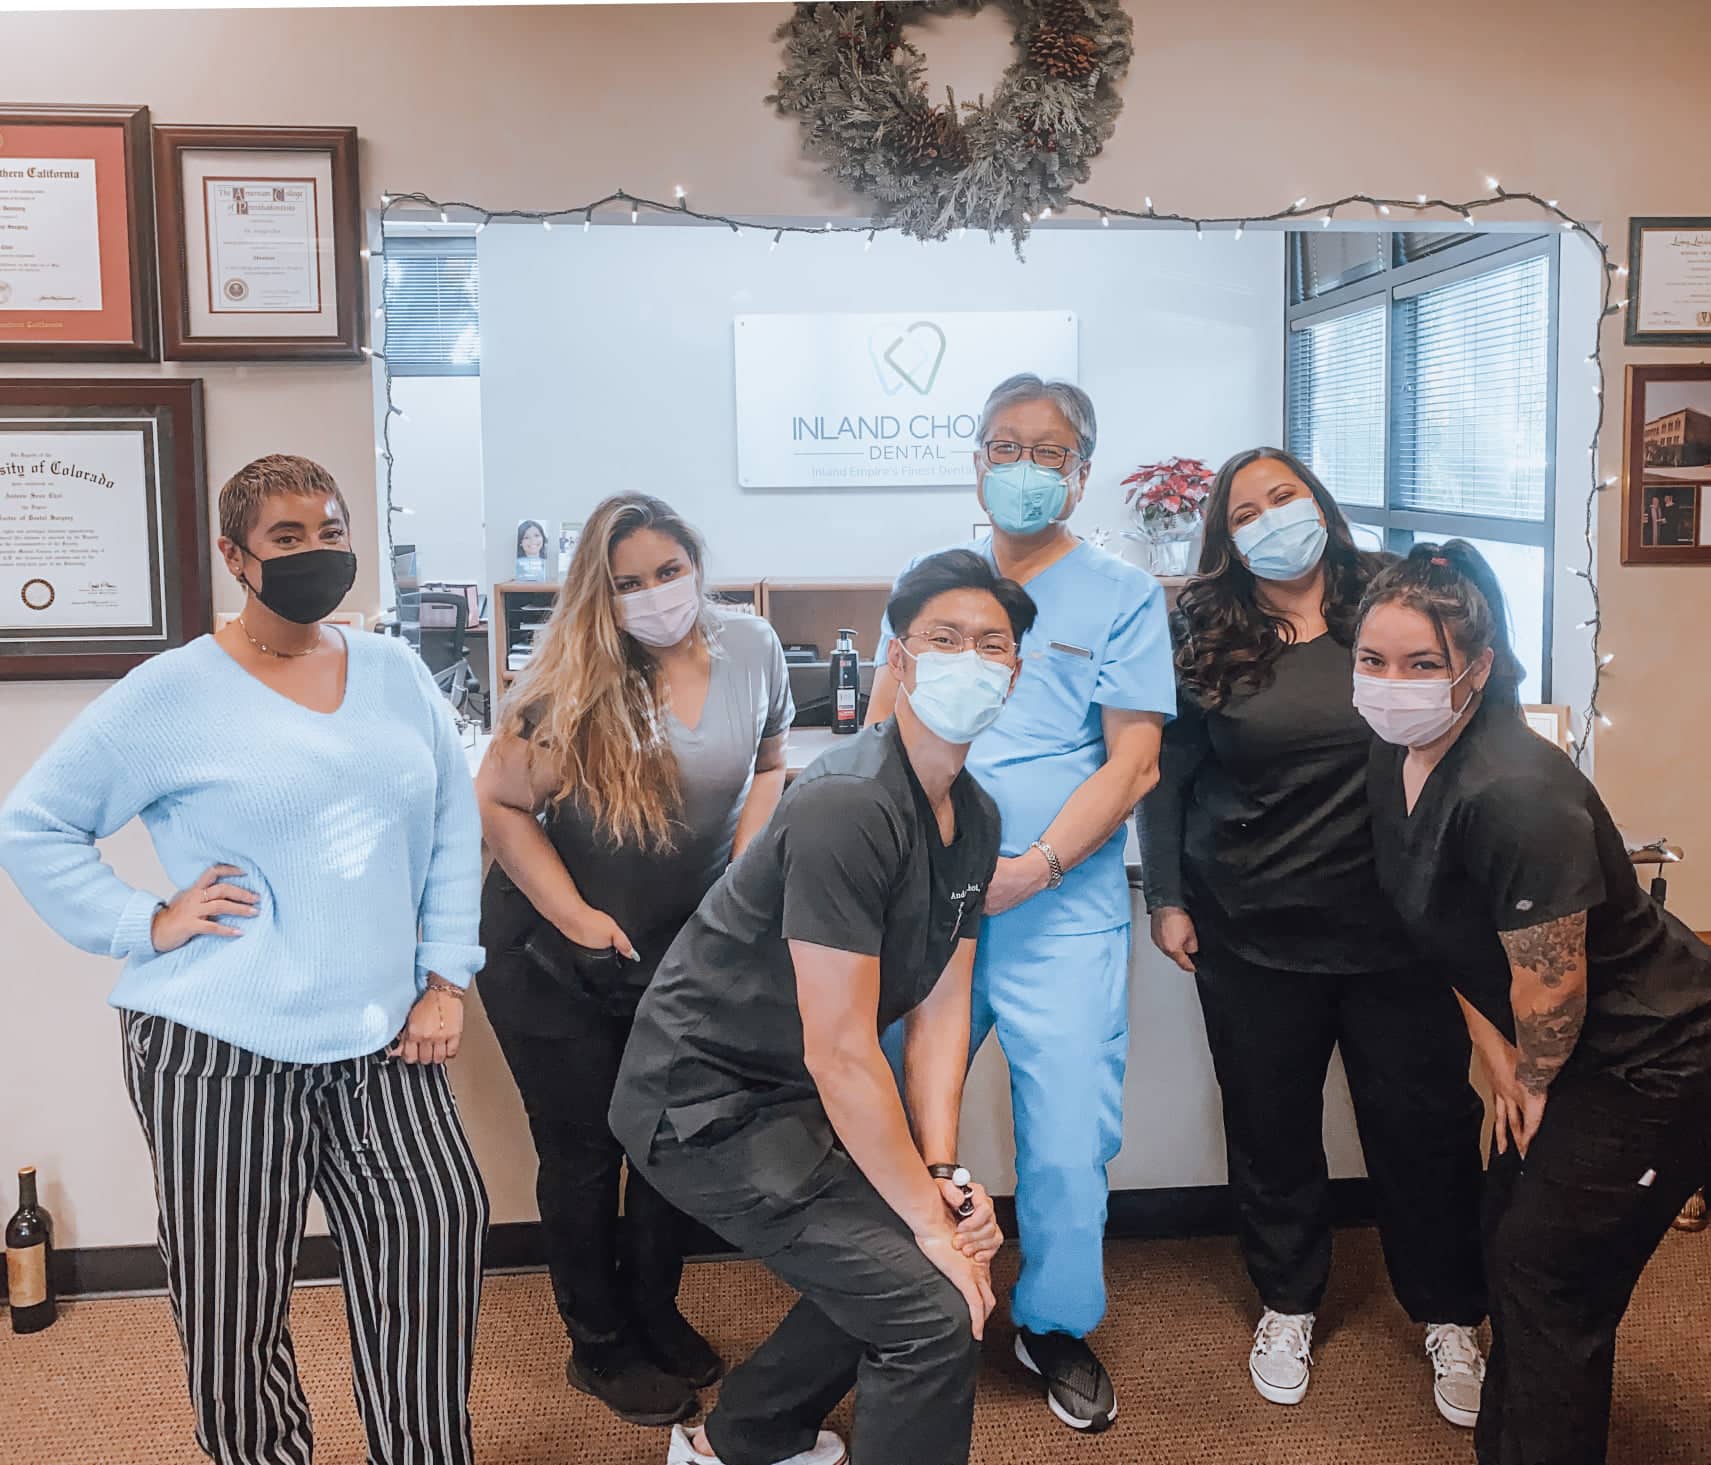 Family dental care in Riverside - Inland Choice Dental